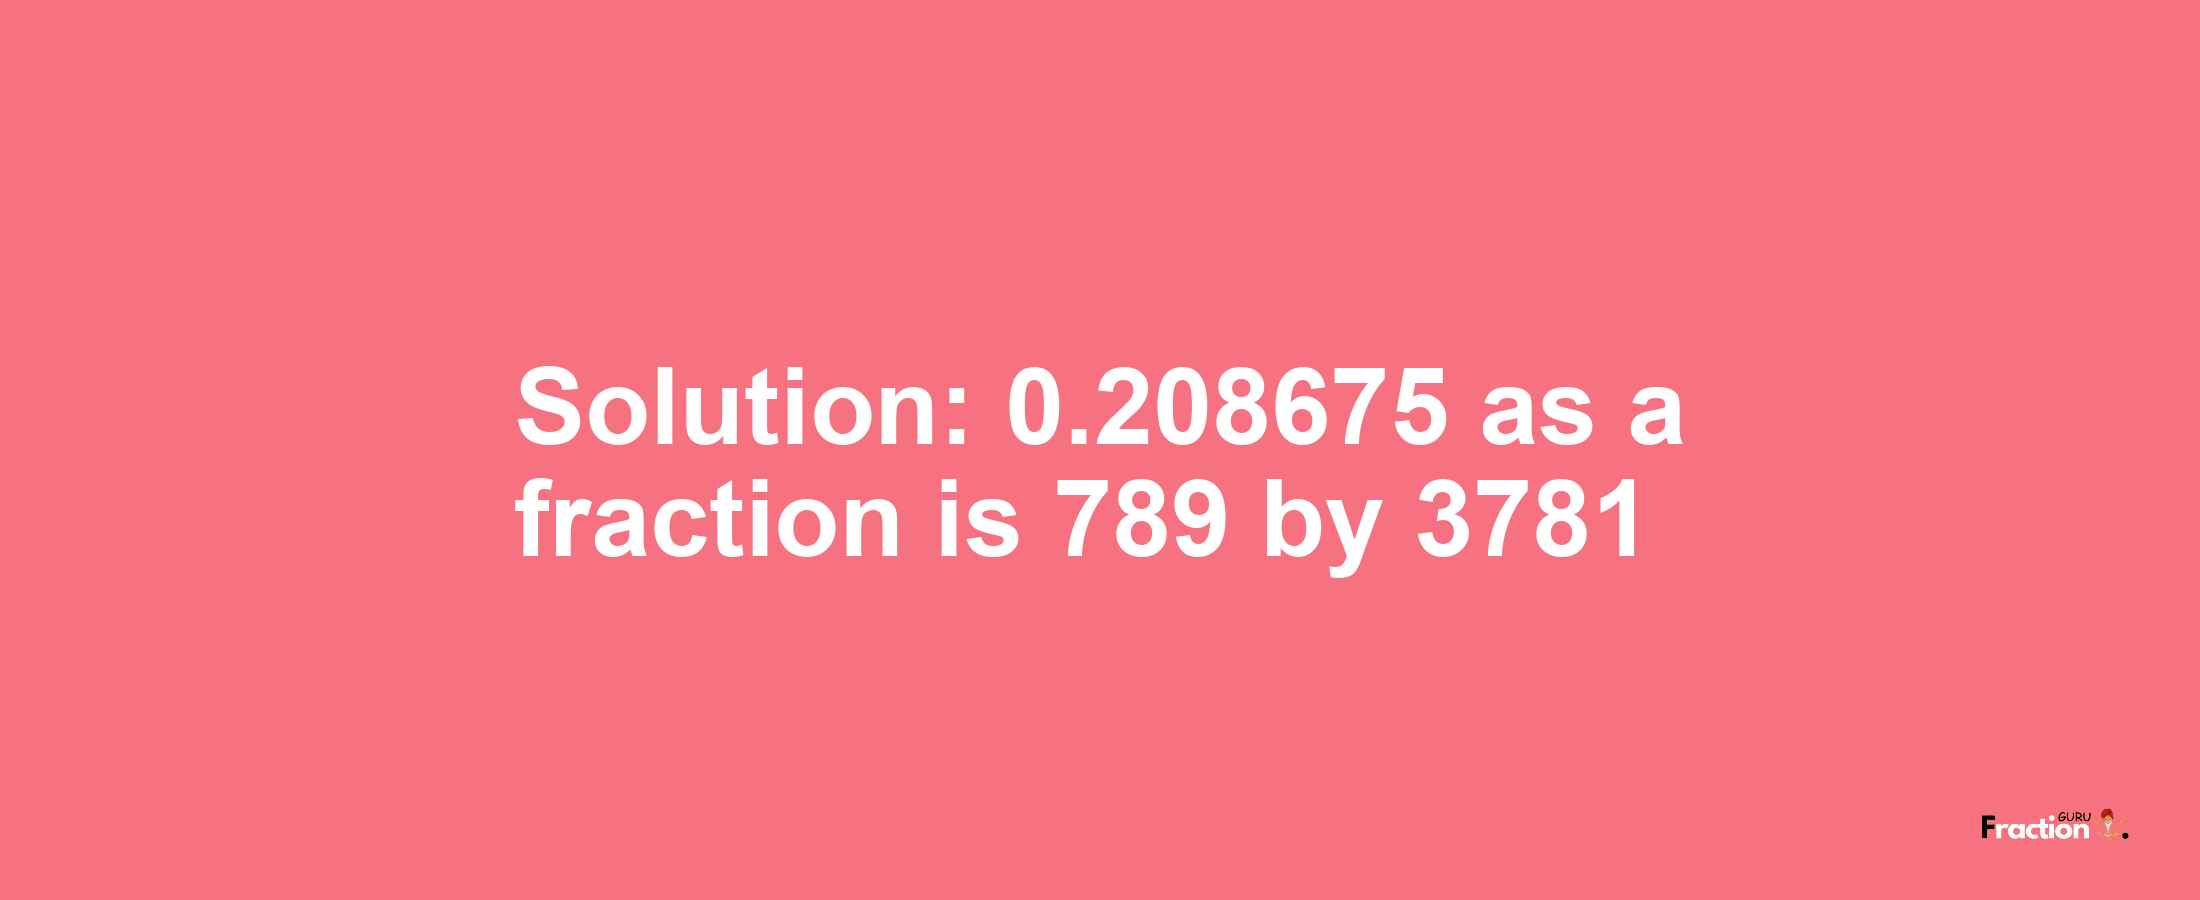 Solution:0.208675 as a fraction is 789/3781